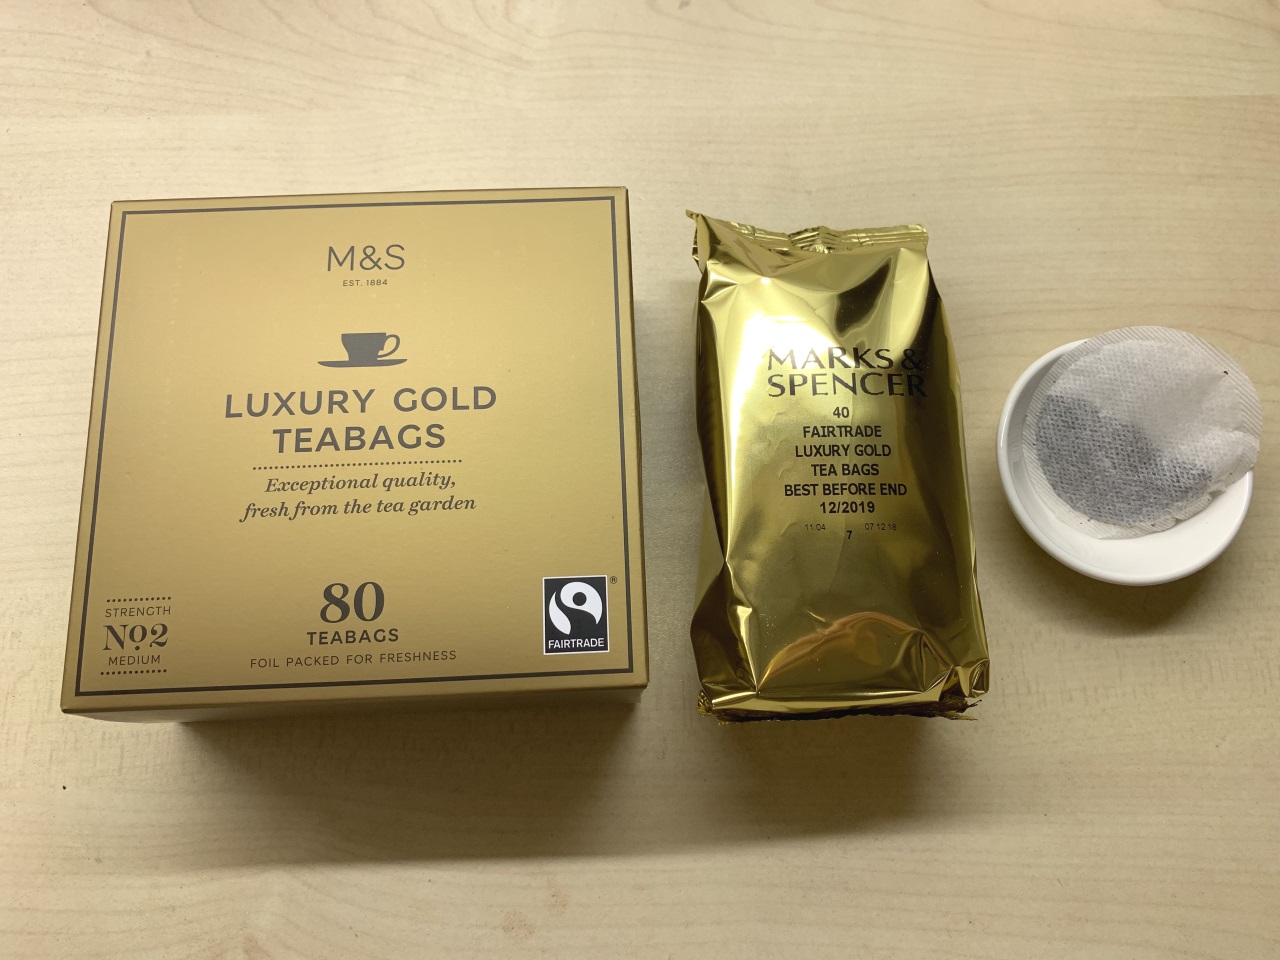 LUXURY GOLD TEABAGS